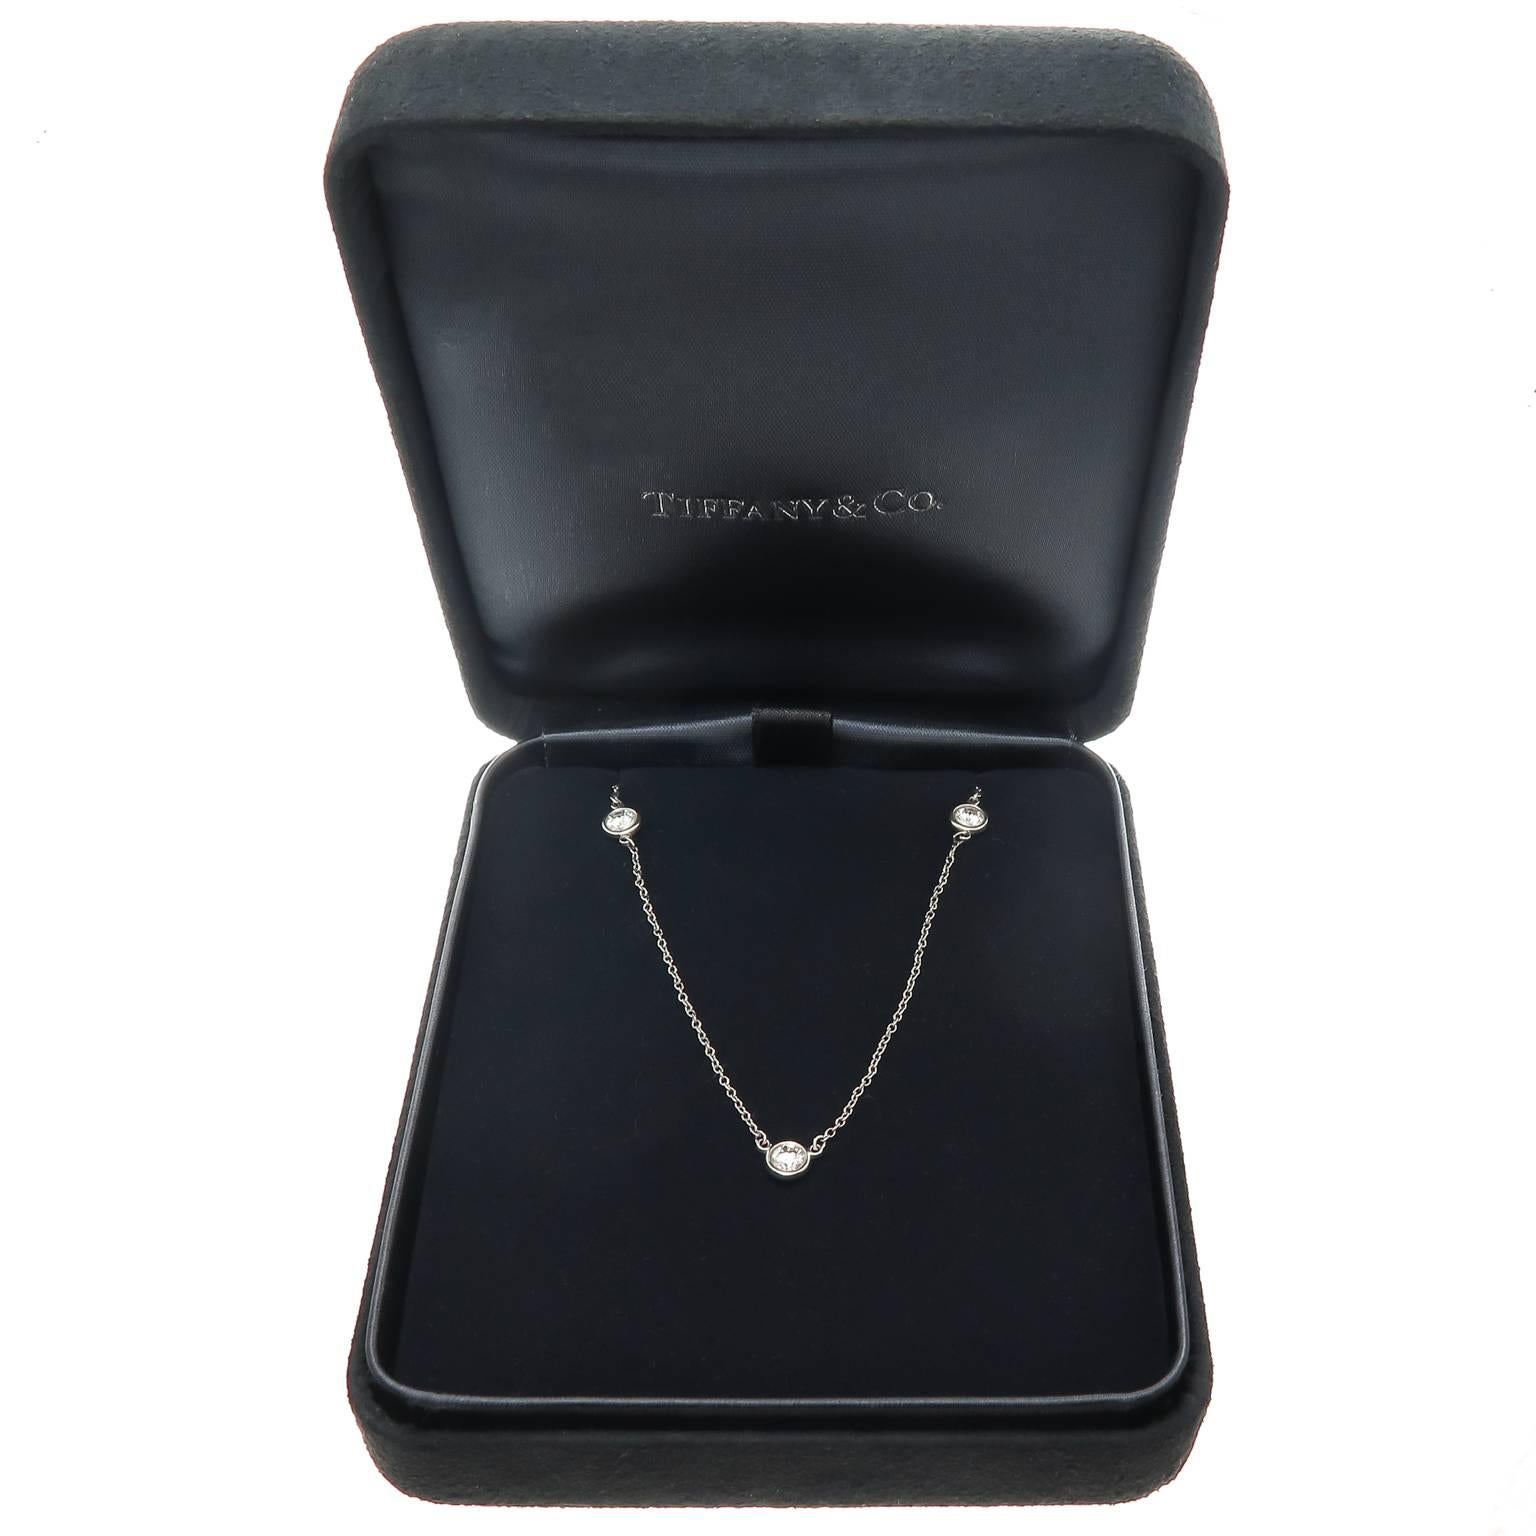 Circa 2005 Elsa Peretti for Tiffany & company Platinum, Diamonds by the Yard Collection Necklace, set with .20 carat Round Brilliant cut Diamonds totaling .60 Carat. Total necklace length 17 Inch. Comes in Original Tiffany Presentation Box.